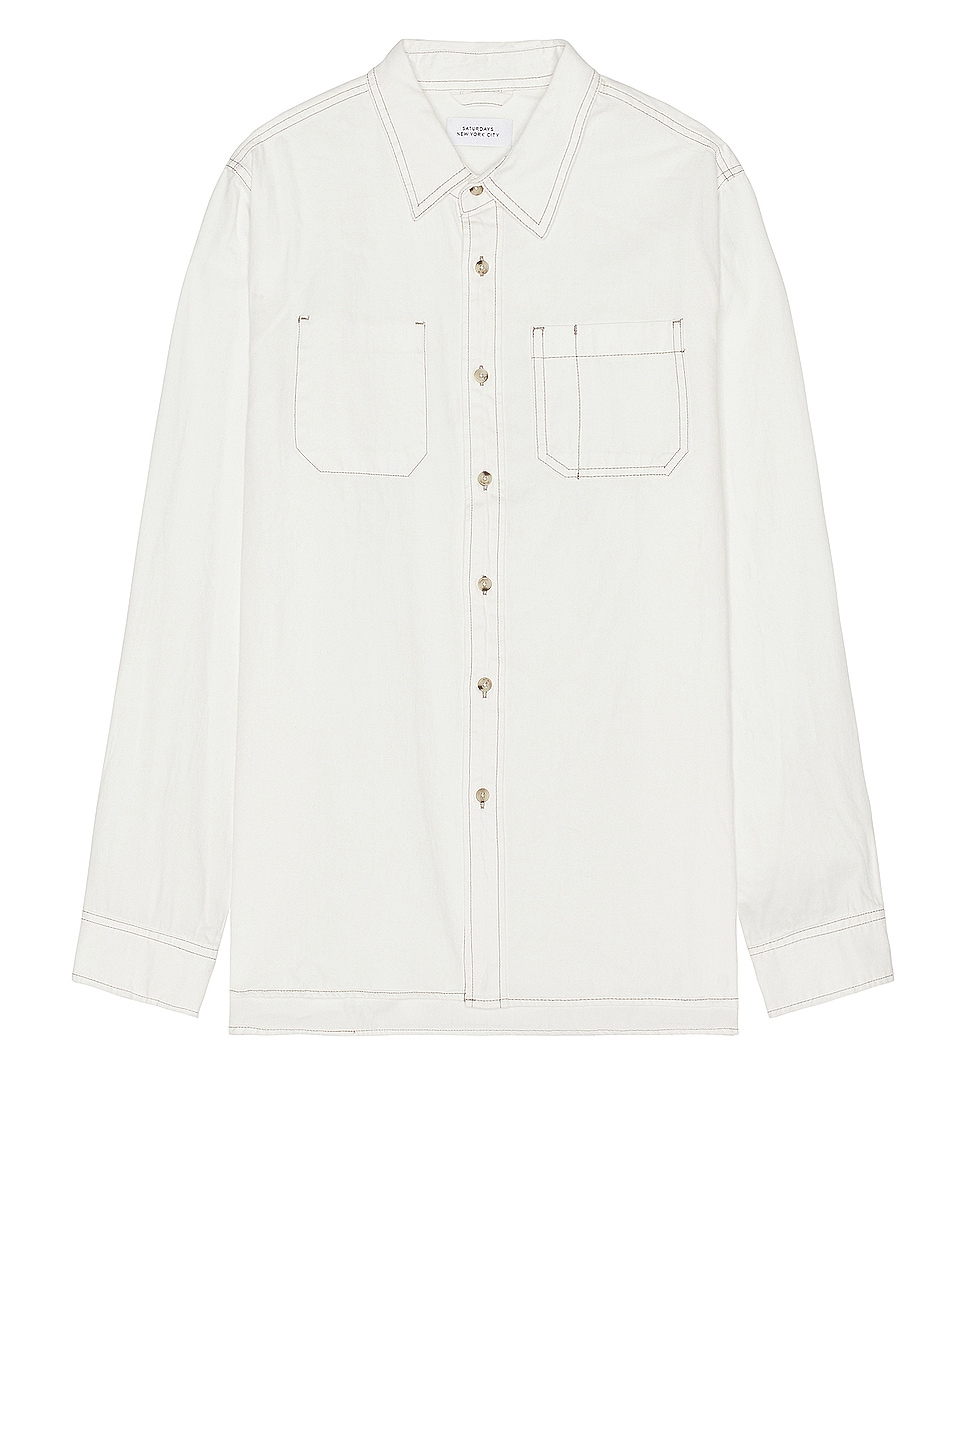 Image 1 of SATURDAYS NYC Kenmare Chambray Long Sleeve Shirt in Ivory